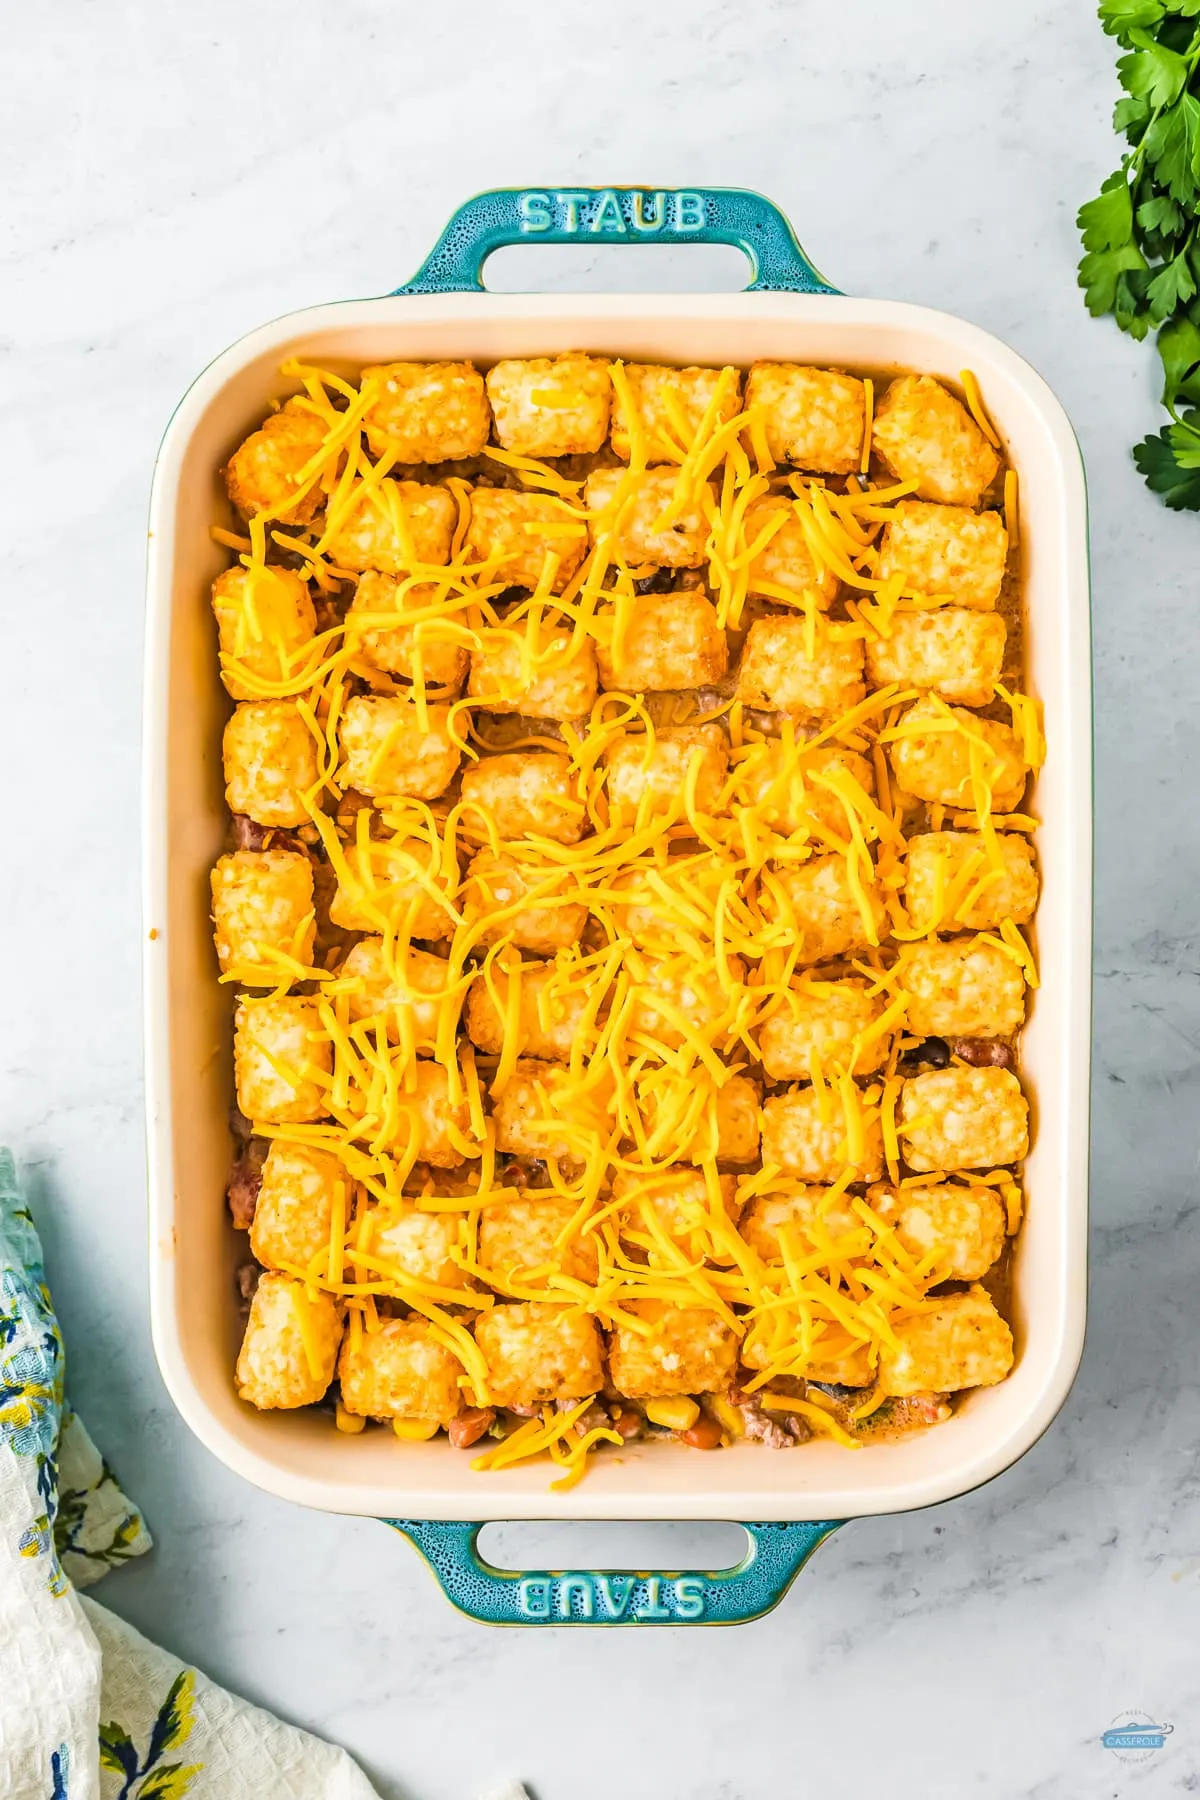 tater tots and cheese in a casserole dish